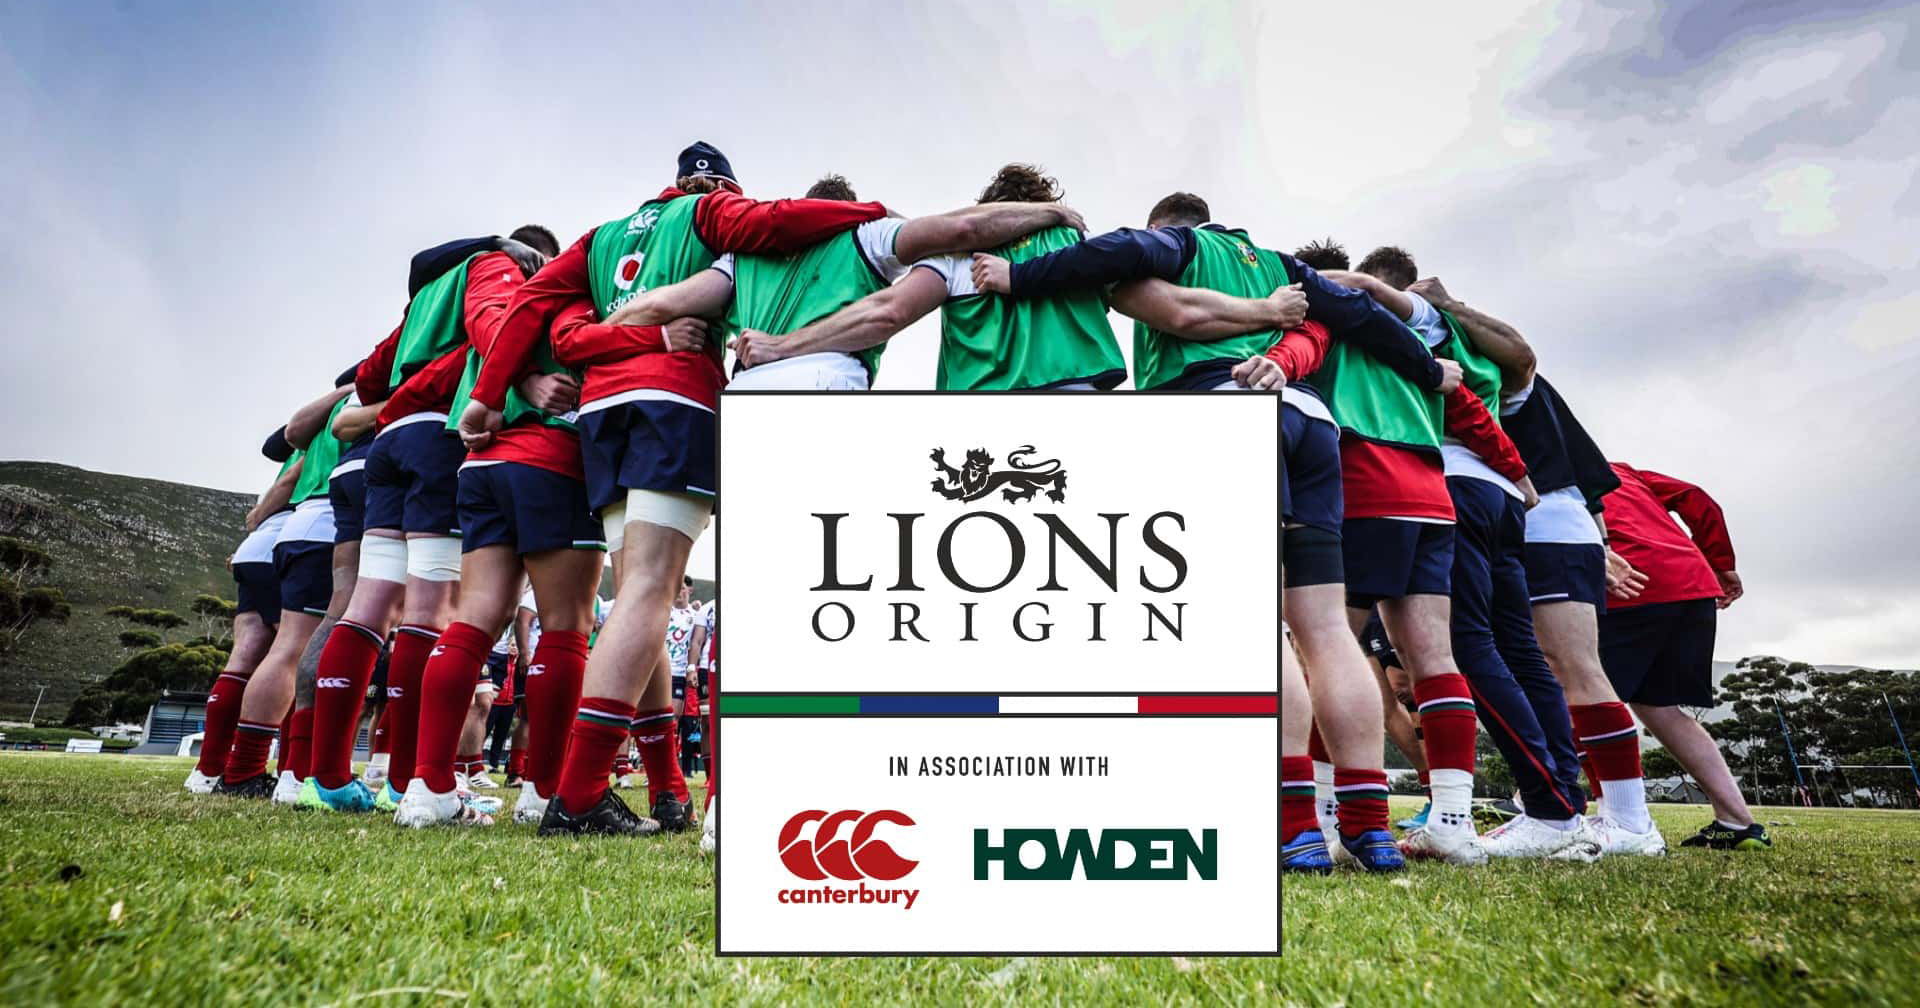 Lions Origin logo with background of rugby players in a huddle. With Canterbury and Howden logos.